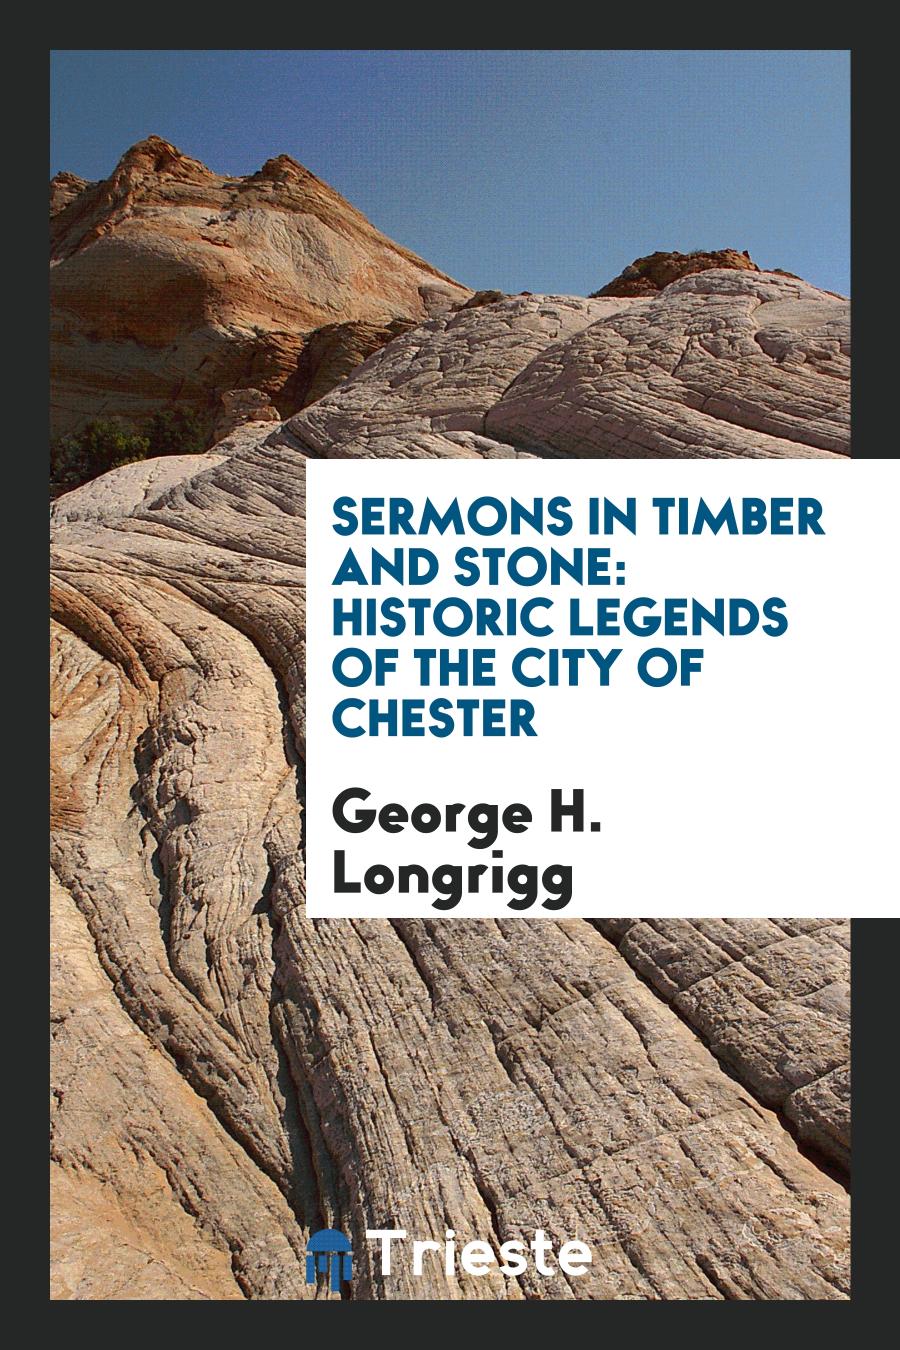 Sermons in Timber and Stone: Historic Legends of the City of Chester